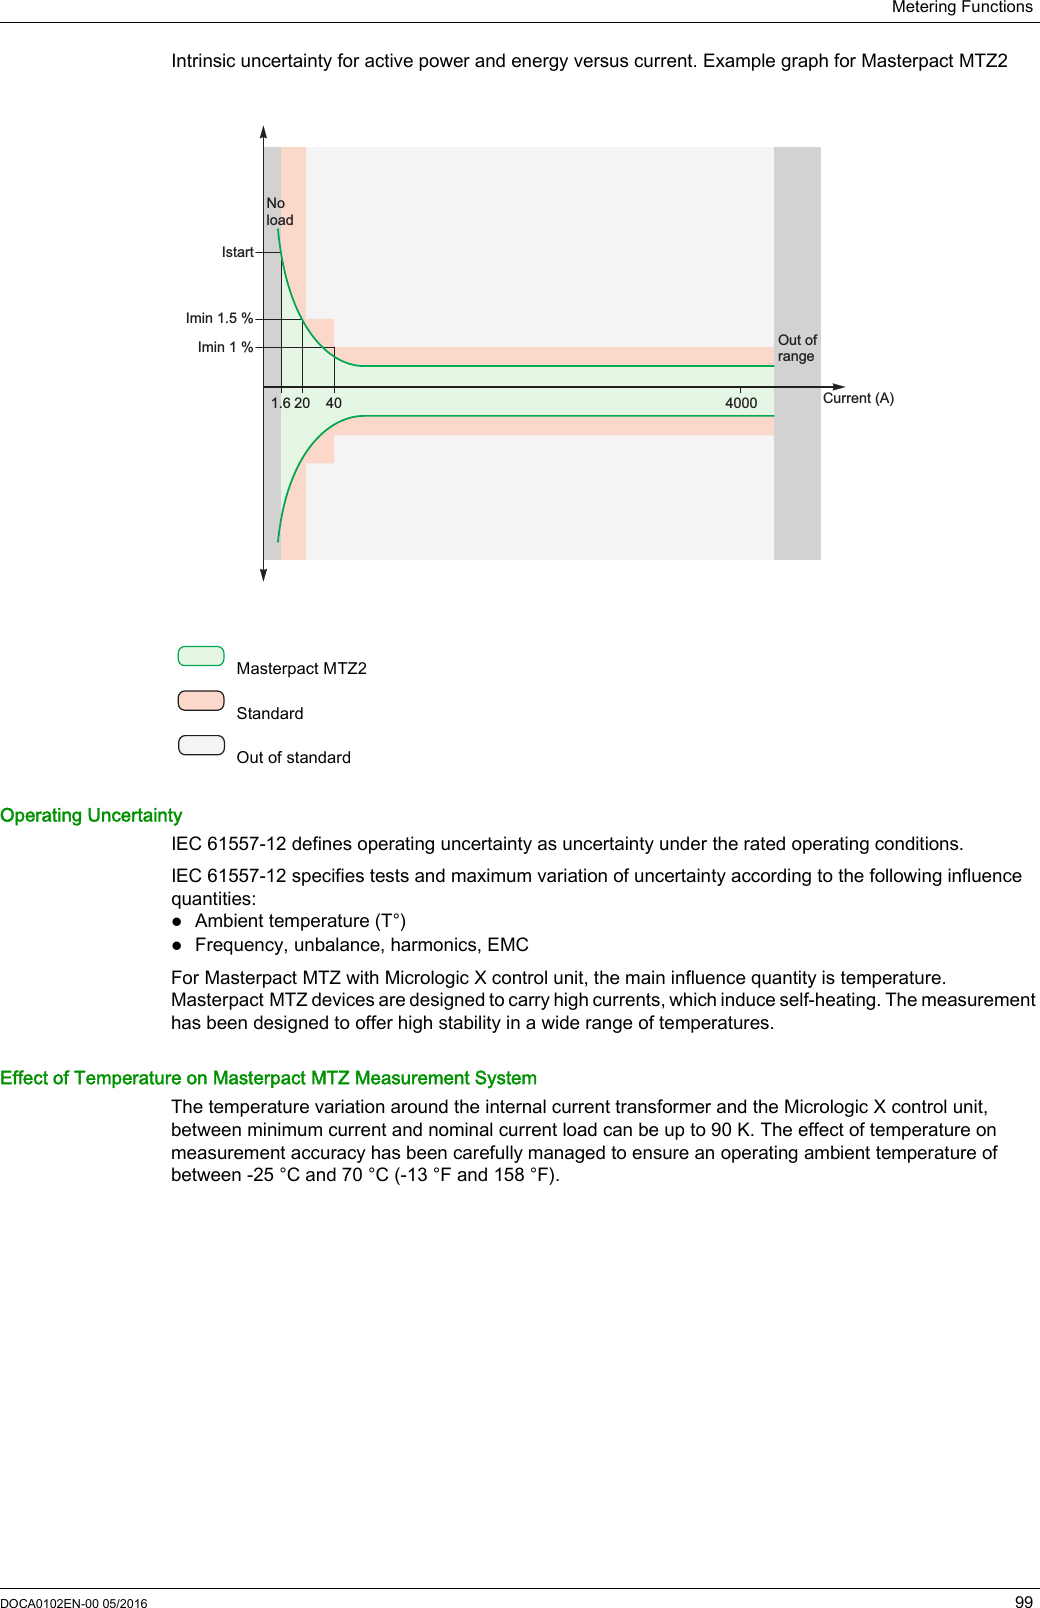 Metering FunctionsDOCA0102EN-00 05/2016 99Intrinsic uncertainty for active power and energy versus current. Example graph for Masterpact MTZ2Operating UncertaintyIEC 61557-12 defines operating uncertainty as uncertainty under the rated operating conditions.IEC 61557-12 specifies tests and maximum variation of uncertainty according to the following influence quantities:Ambient temperature (T°)Frequency, unbalance, harmonics, EMCFor Masterpact MTZ with Micrologic X control unit, the main influence quantity is temperature. Masterpact MTZ devices are designed to carry high currents, which induce self-heating. The measurement has been designed to offer high stability in a wide range of temperatures. Effect of Temperature on Masterpact MTZ Measurement SystemThe temperature variation around the internal current transformer and the Micrologic X control unit, between minimum current and nominal current load can be up to 90 K. The effect of temperature on measurement accuracy has been carefully managed to ensure an operating ambient temperature of between -25 °C and 70 °C (-13 °F and 158 °F). Masterpact MTZ2 Standard Out of standardIstartImin 1.5 %Imin 1 % Out ofrange Current (A) 40201.6 4000Noload